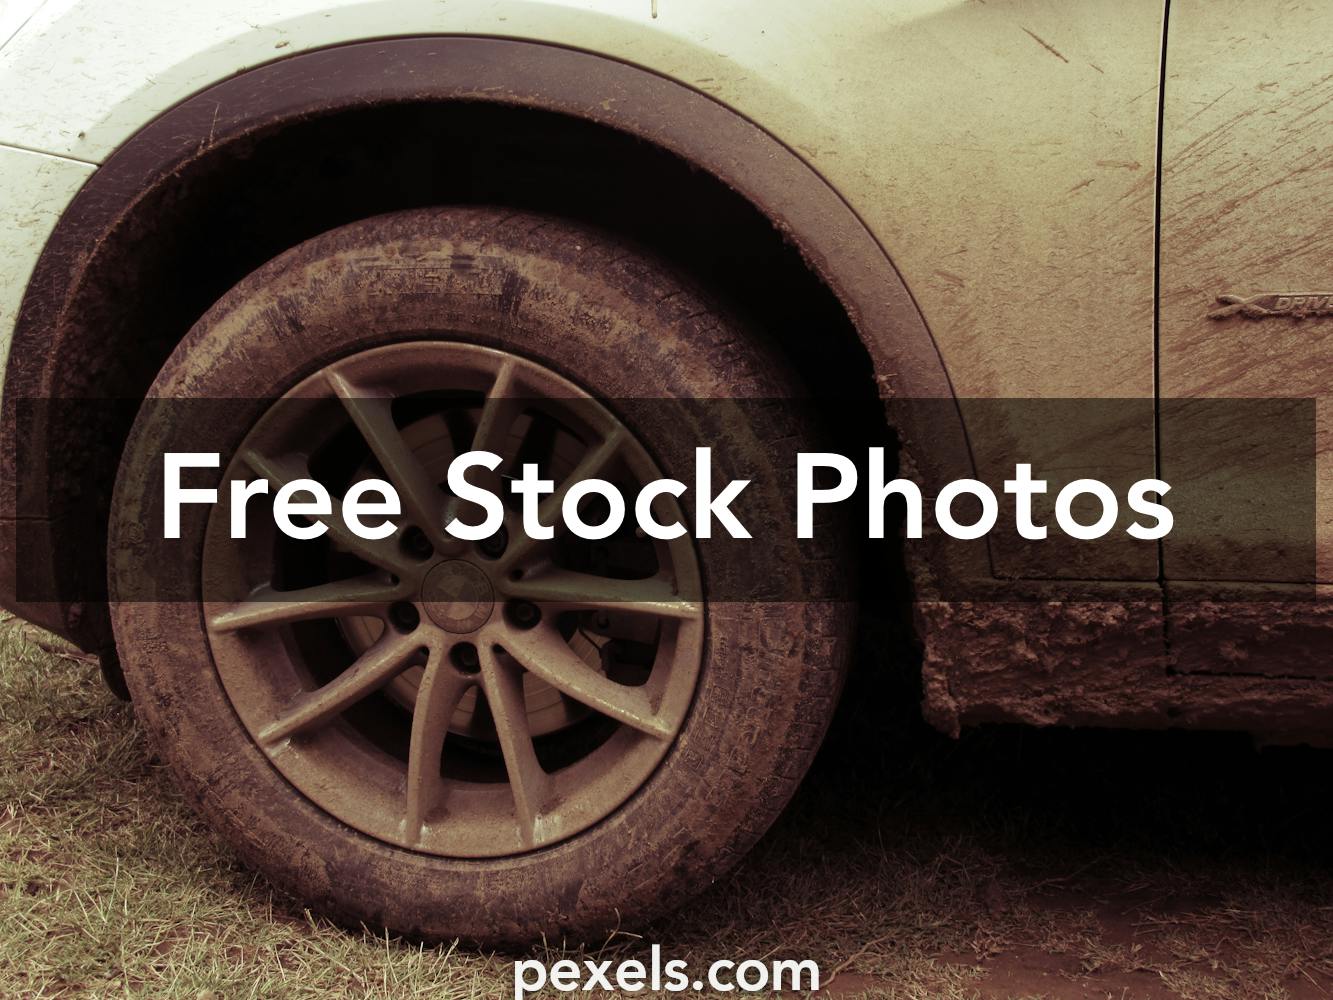 Dirty Car Photos, Download The BEST Free Dirty Car Stock Photos & HD Images